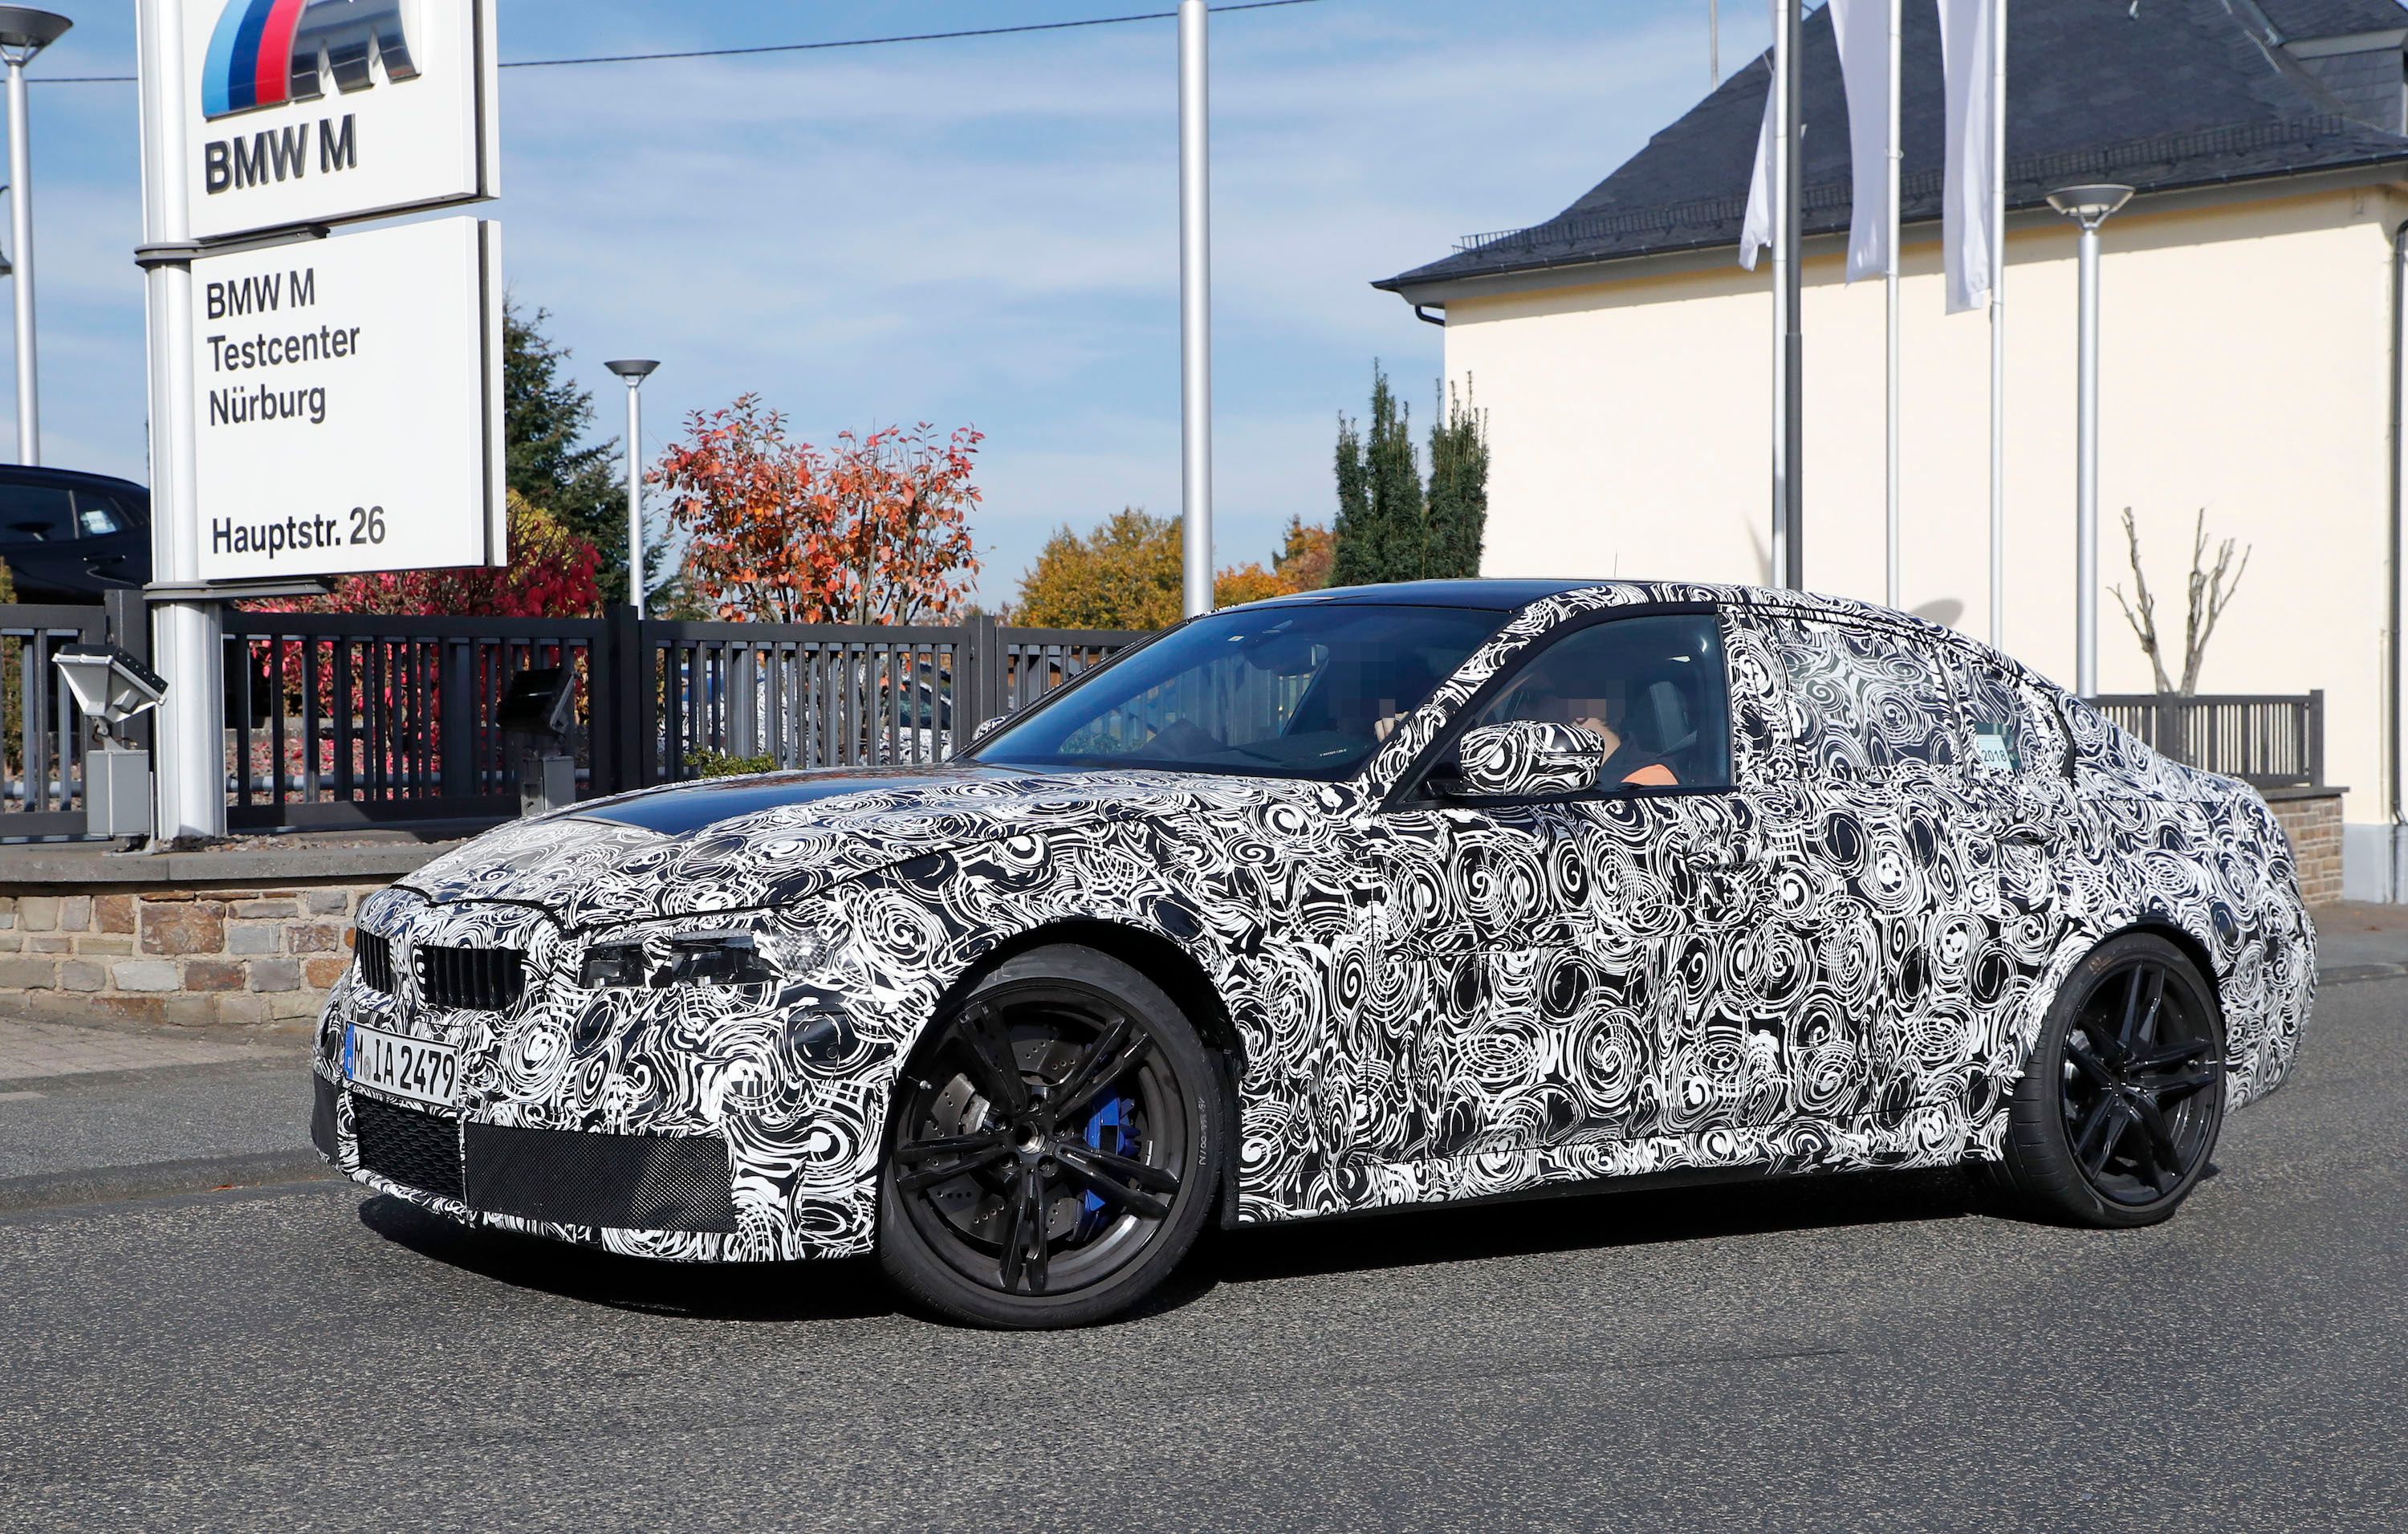 2019 It Looks Like BMW May Offer the M3 With a Manual Transmission After All